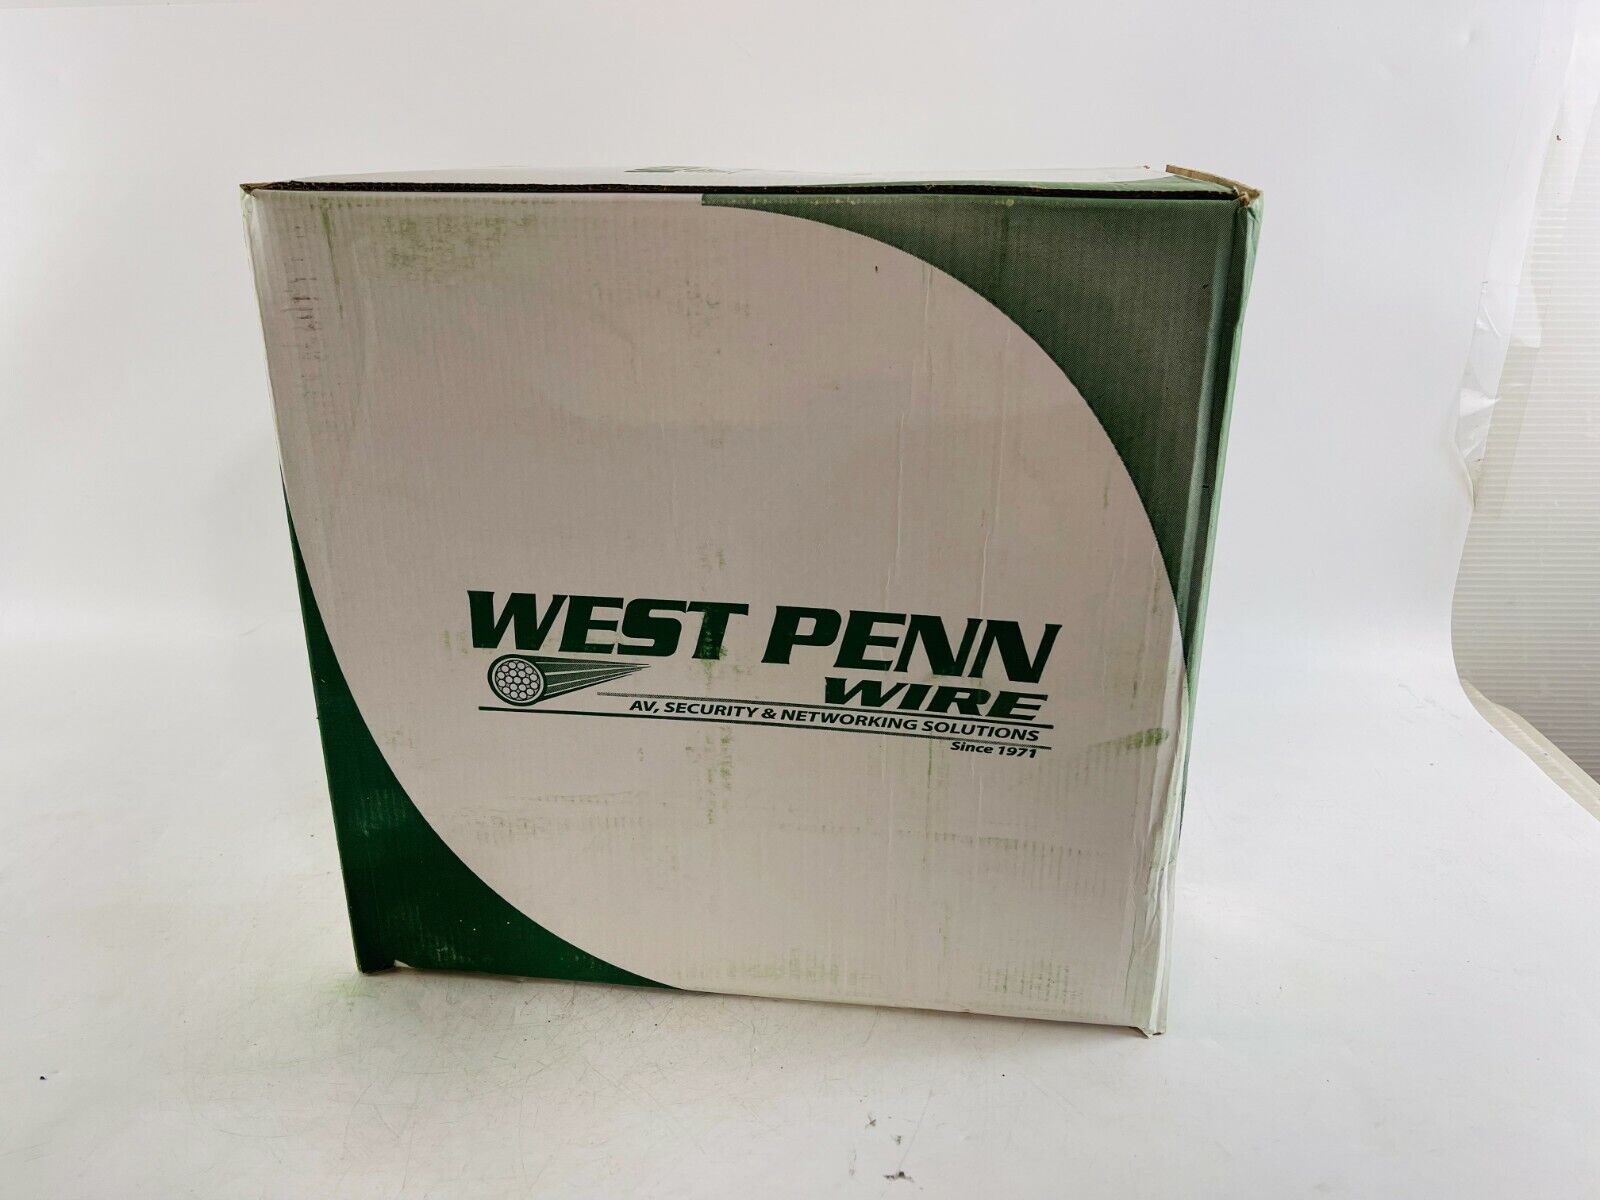 West Penn Wire 254246EZWH1000 4 Pair 23 AWG Shielded CAT6 CMP 1000' White